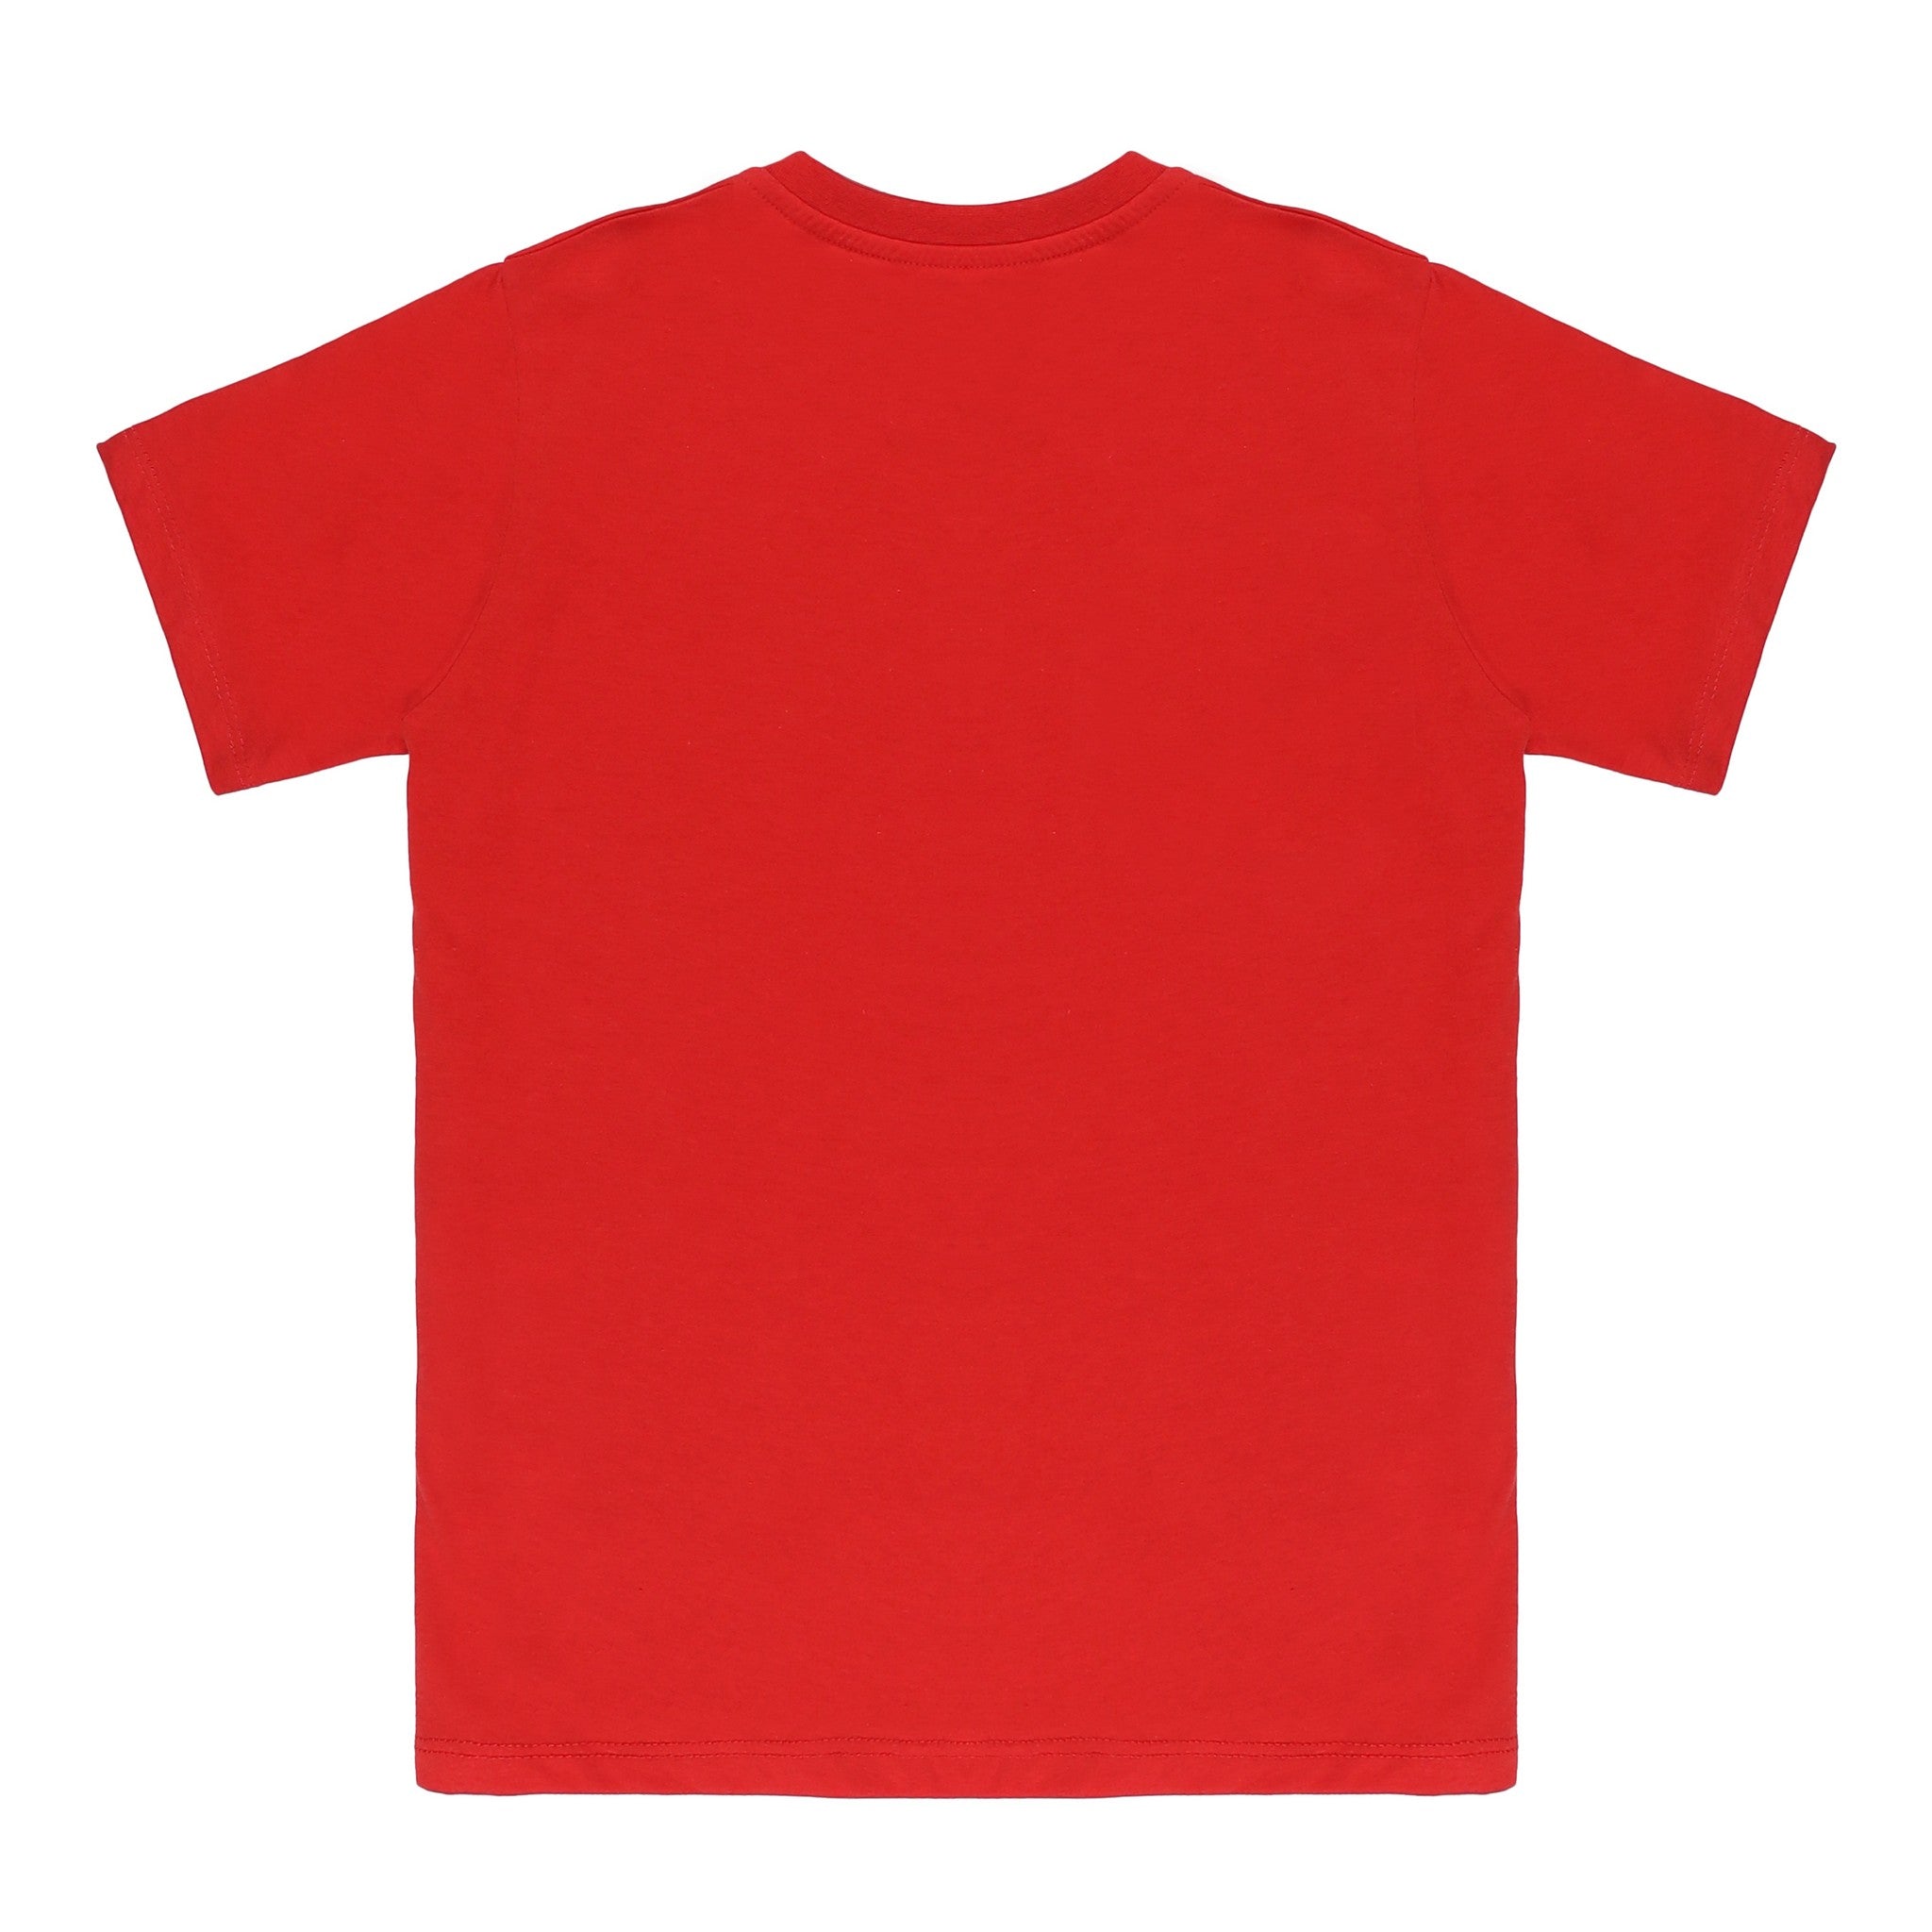 Ride The Wave Print Red T-Shirt